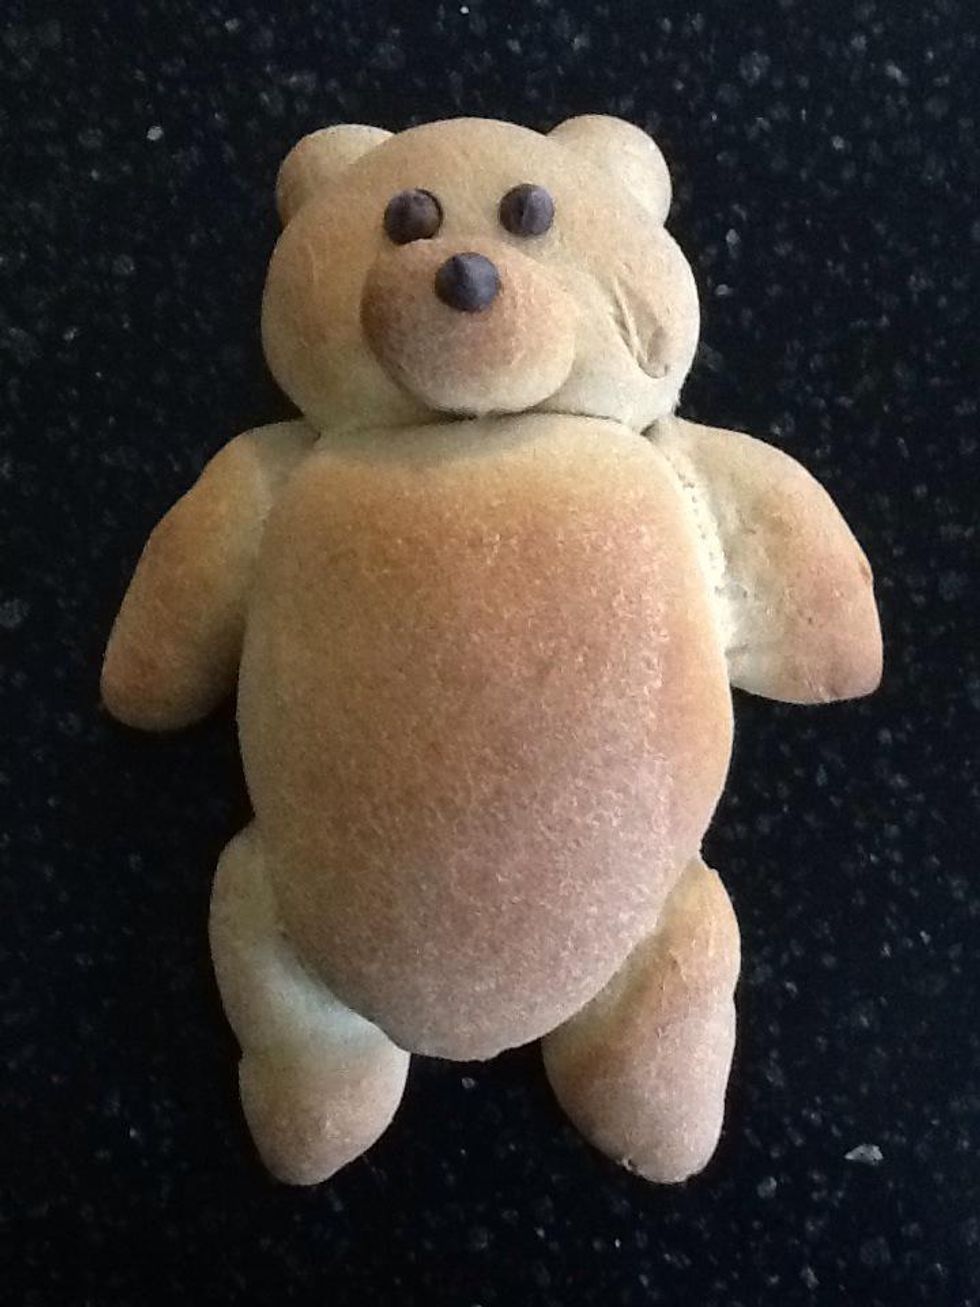 How to make teddy bear bread - B+C Guides